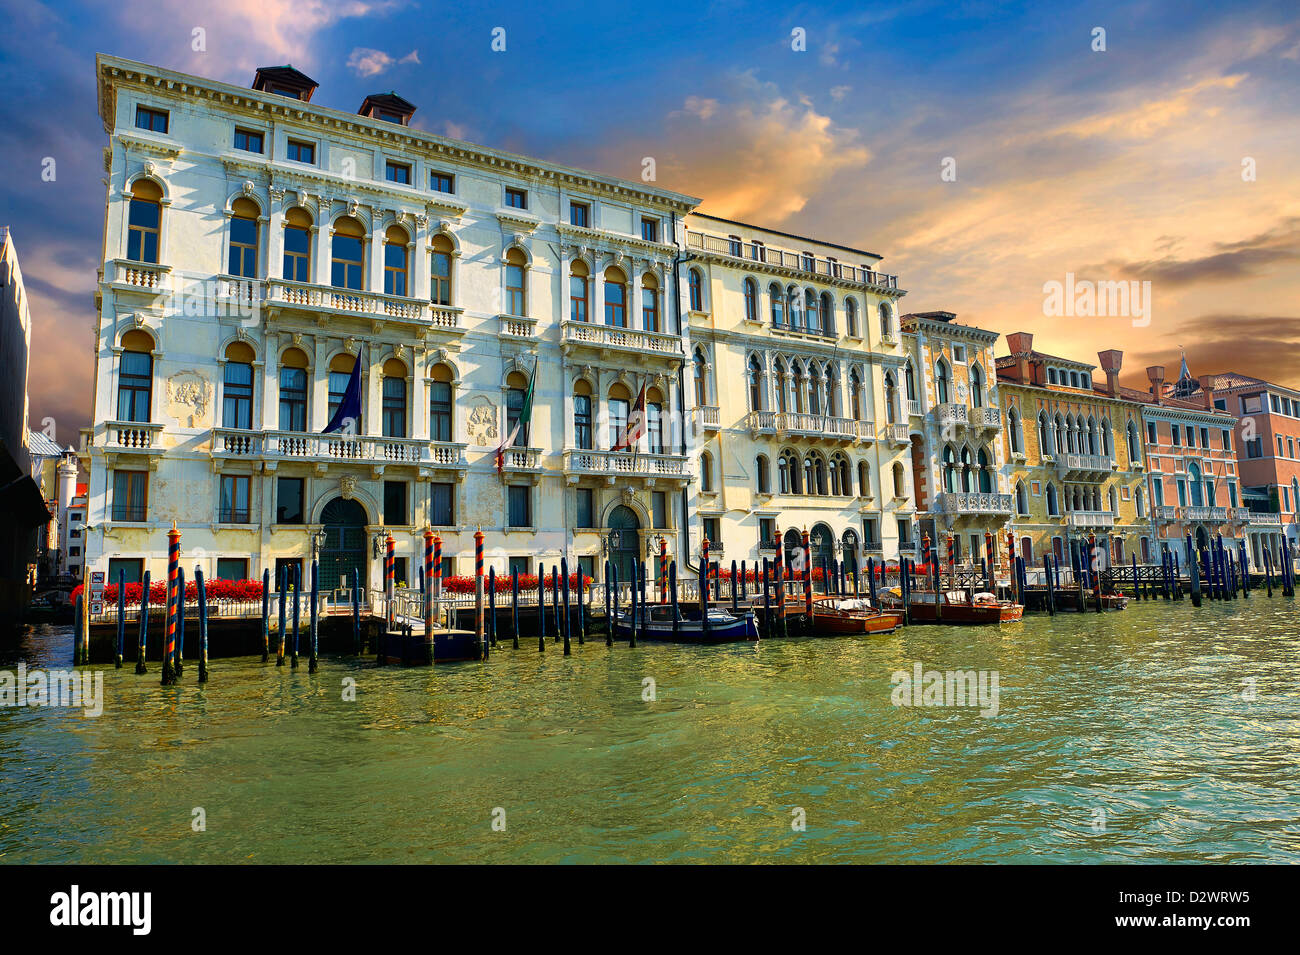 Palaces of the Grand Canal at sunset, Venice Stock Photo